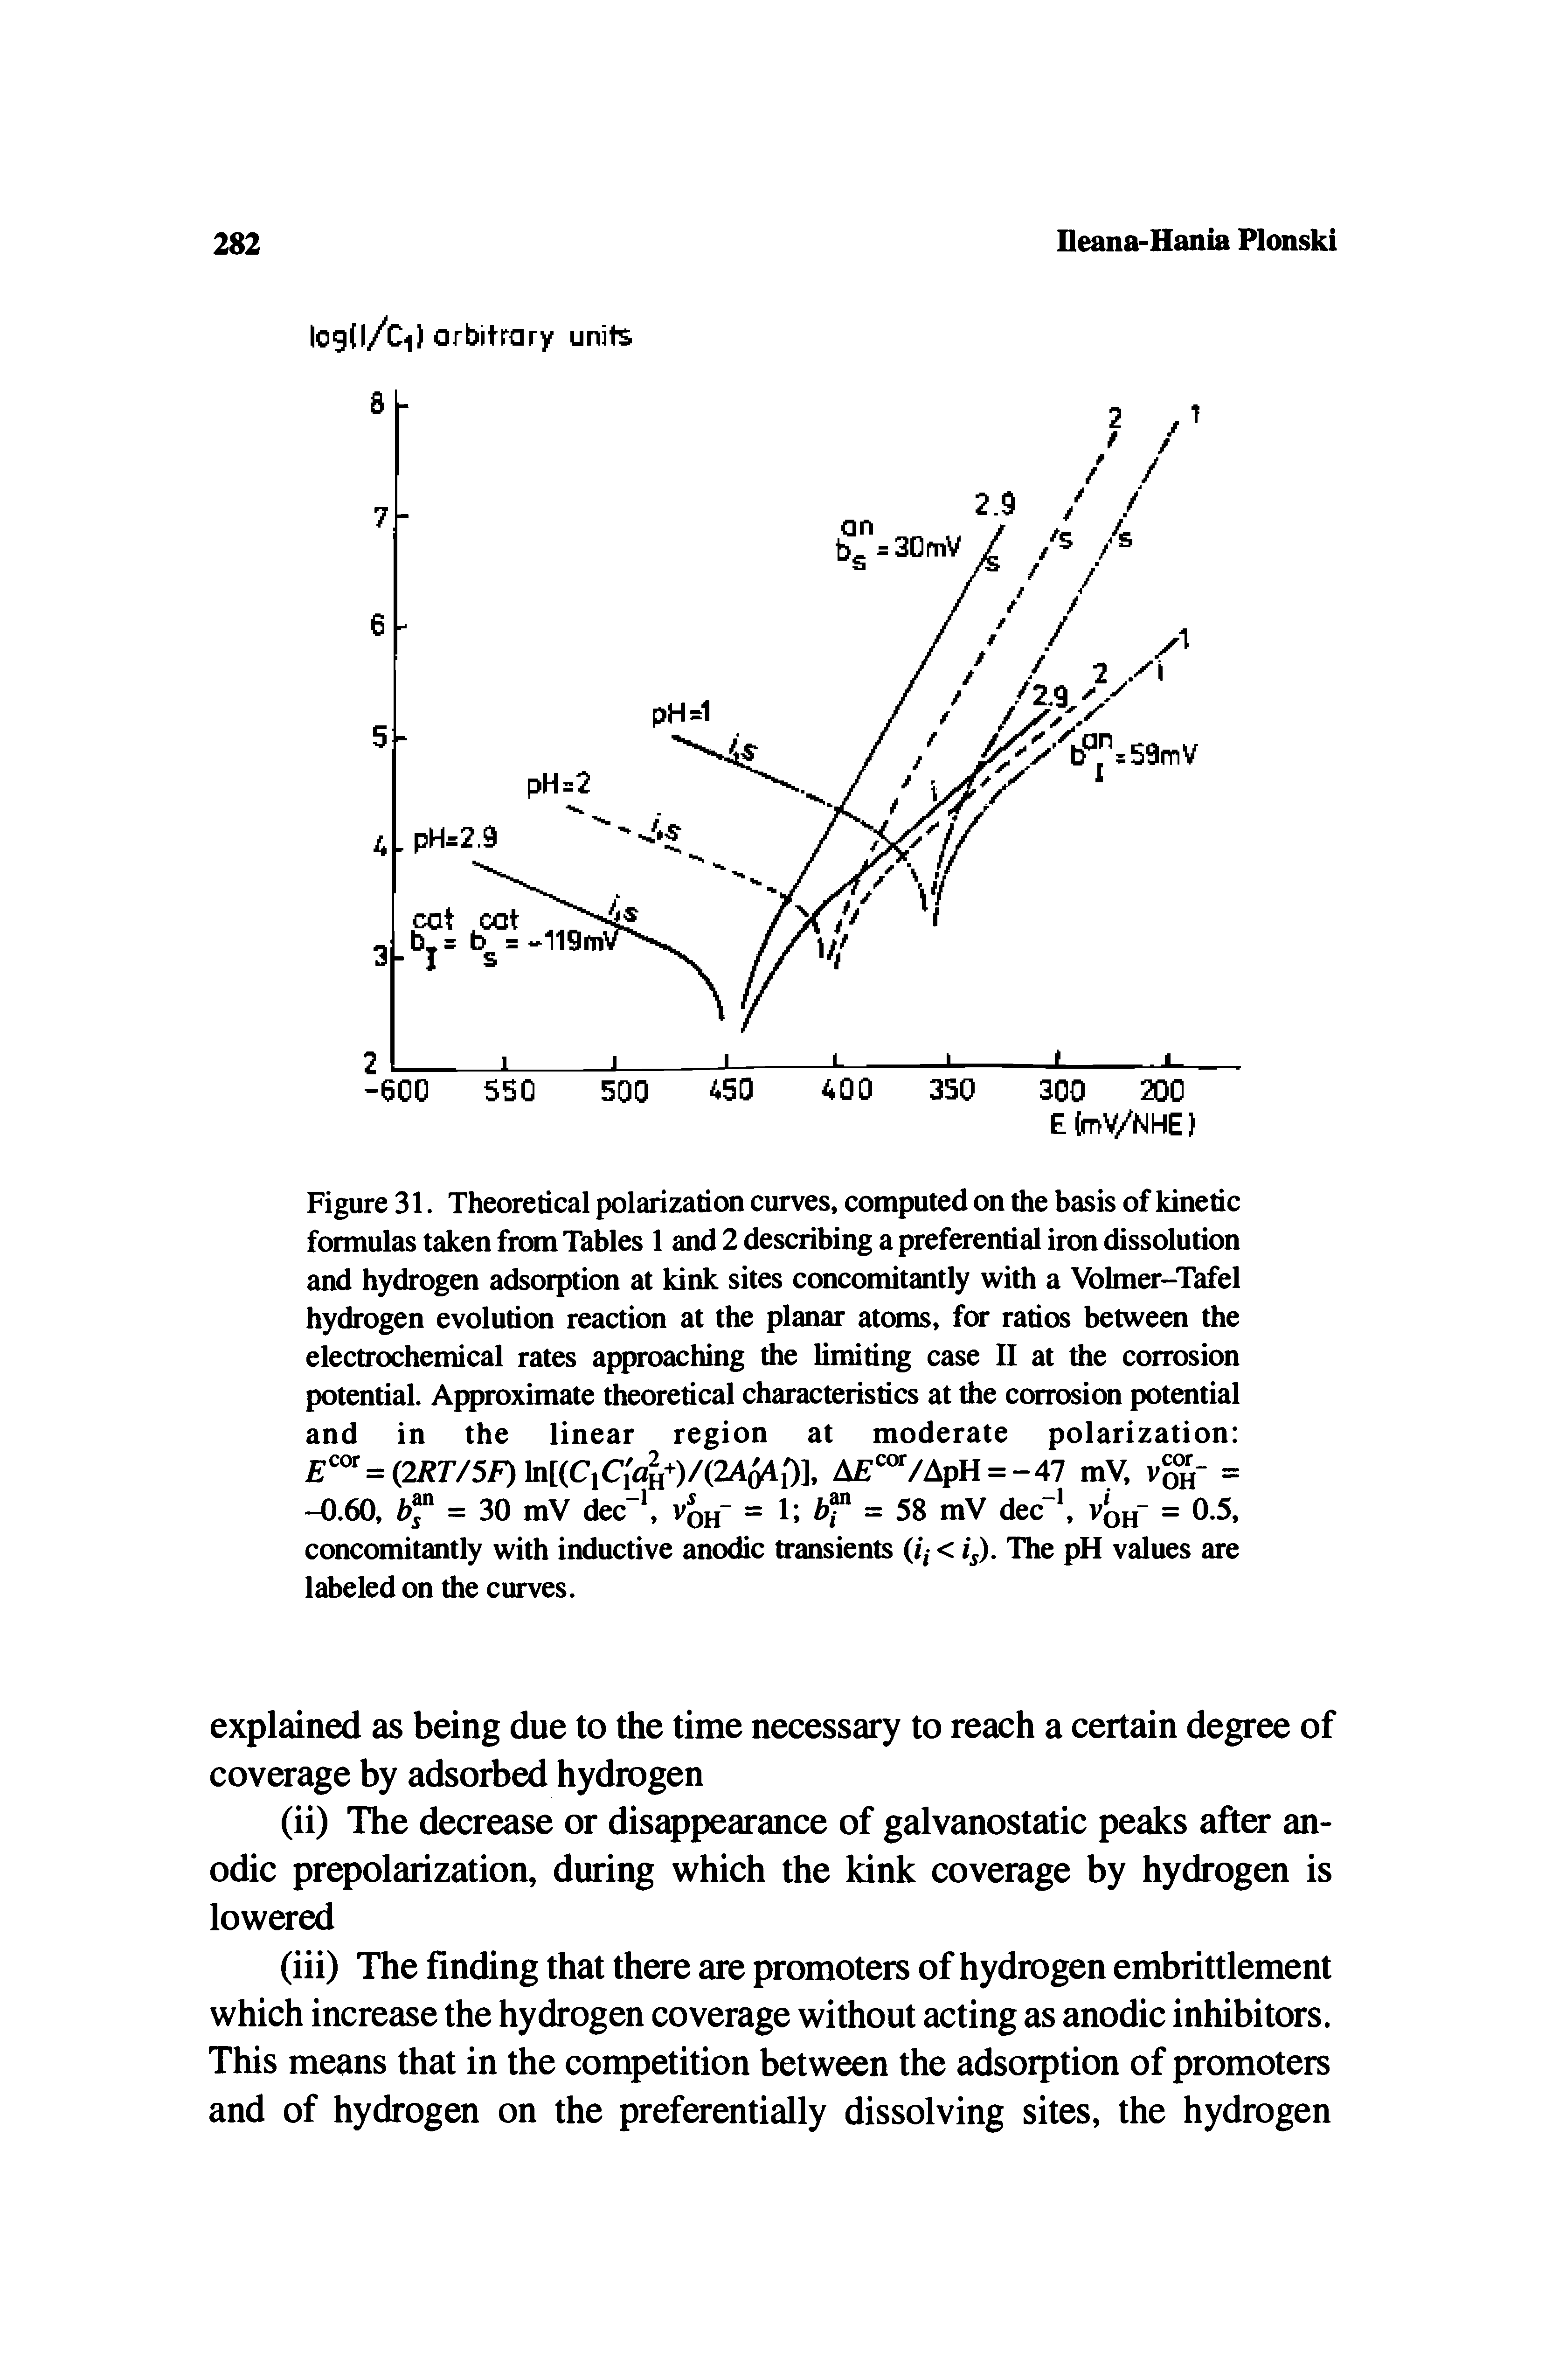 Figure 31. Theoretical polarization curves, computed on the basis of kinetic formulas taken from Tables 1 and 2 describing a preferential iron dissolution and hydrogen adsorption at kink sites concomitantly with a Volmer-Tafel hydrogen evolution reaction at the planar atoms, for ratios between the electrochemical rates approaching the limiting case II at the corrosion potential. Approximate theoretical characteristics at the corrosion potential and in the linear region at moderate polarization " = (2/er/5f)to[(C,Ci 4 )/(2A )]. A /ApH = -47 mV, = -0.60, = 30 mV dec", Voh" = U bf = 5i mW dec", vi, - = 0.5,...